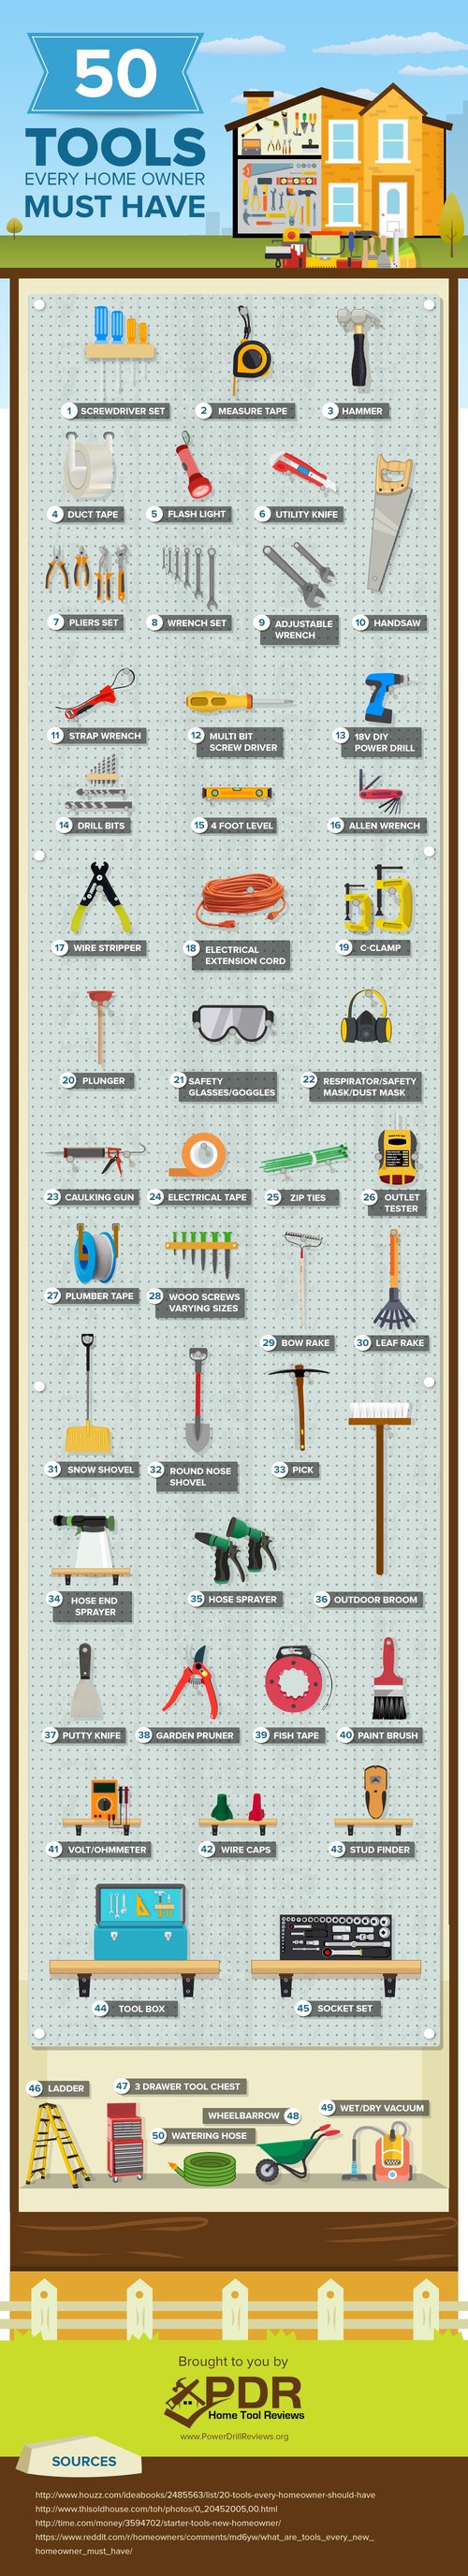 50-tools-home-owners-must-have.jpg